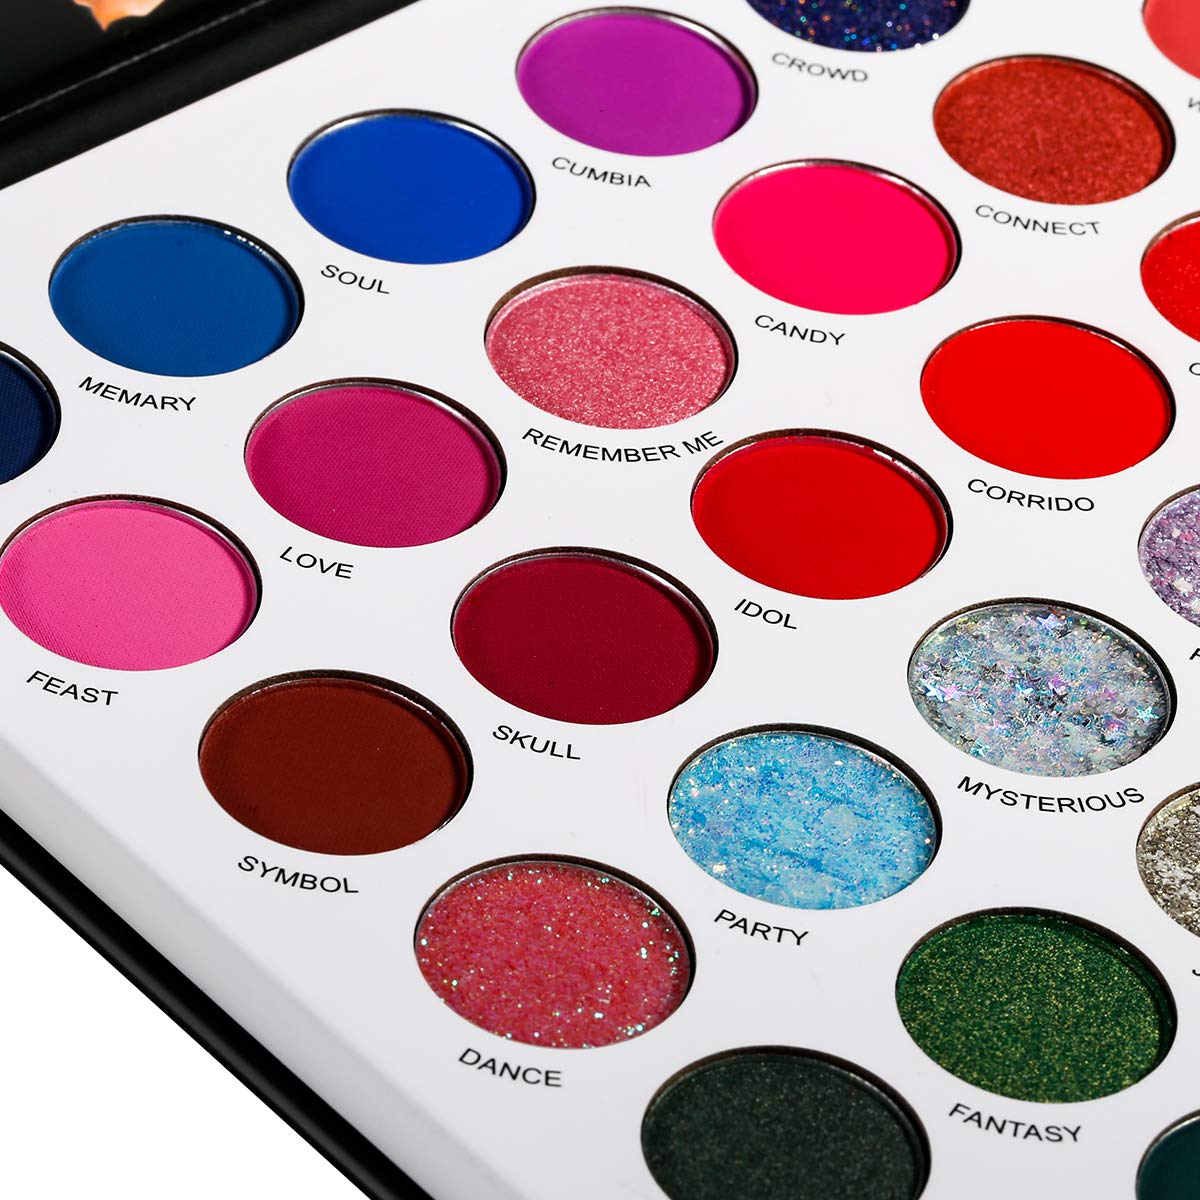  DELANCI Big Colorful Eyeshadow Palette Professional 54 Color Board Eye Shadow Bright Neon Glitter Matte Shimmer Makeup Pallet Highly Pigmented Powder Eye Shadow